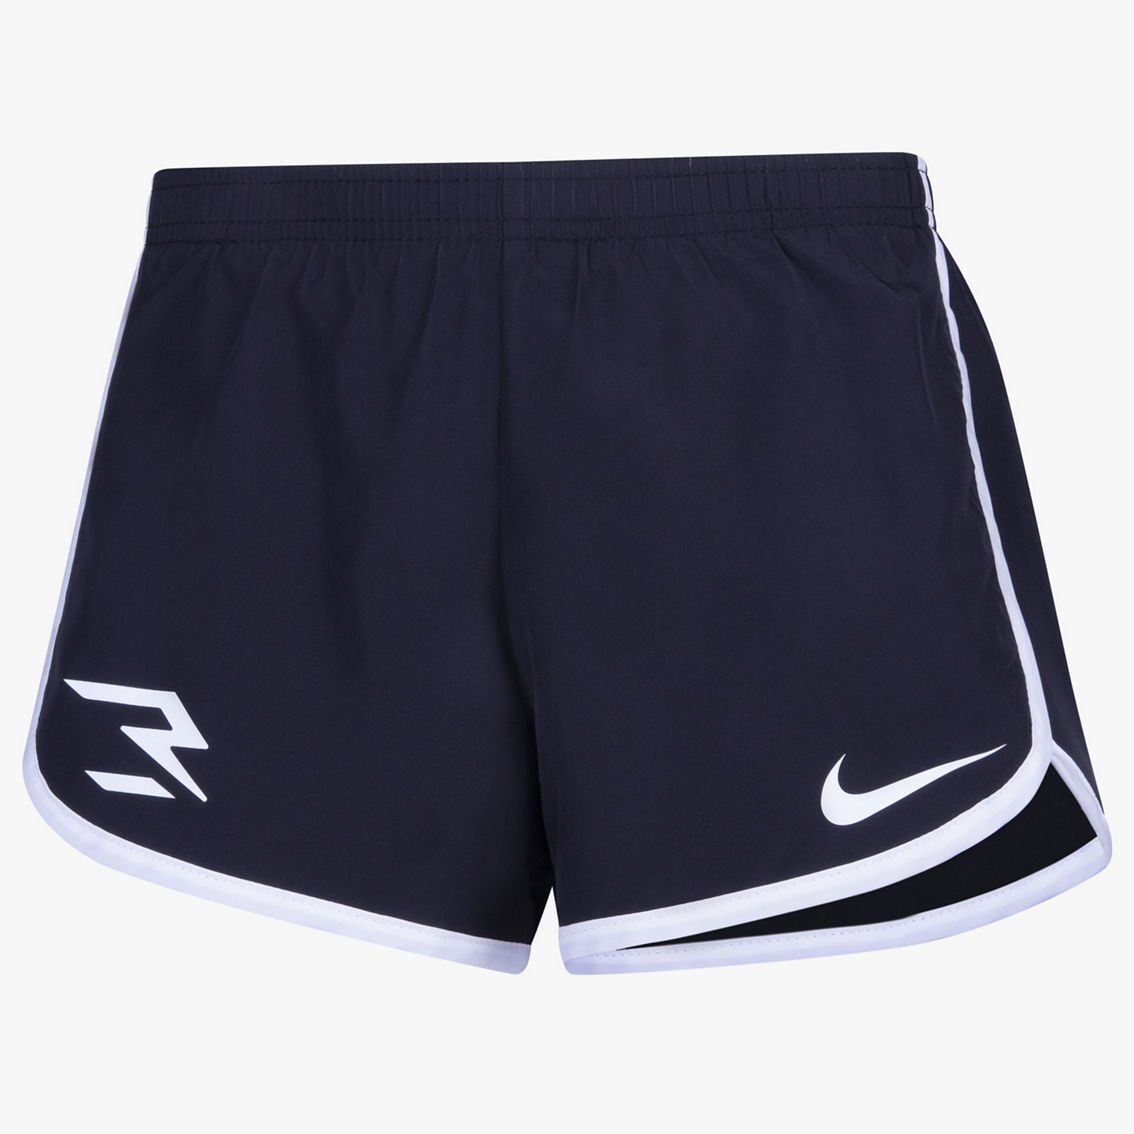 3Brand by Russell Wilson Big Girls Icon Shorts - Image 4 of 9